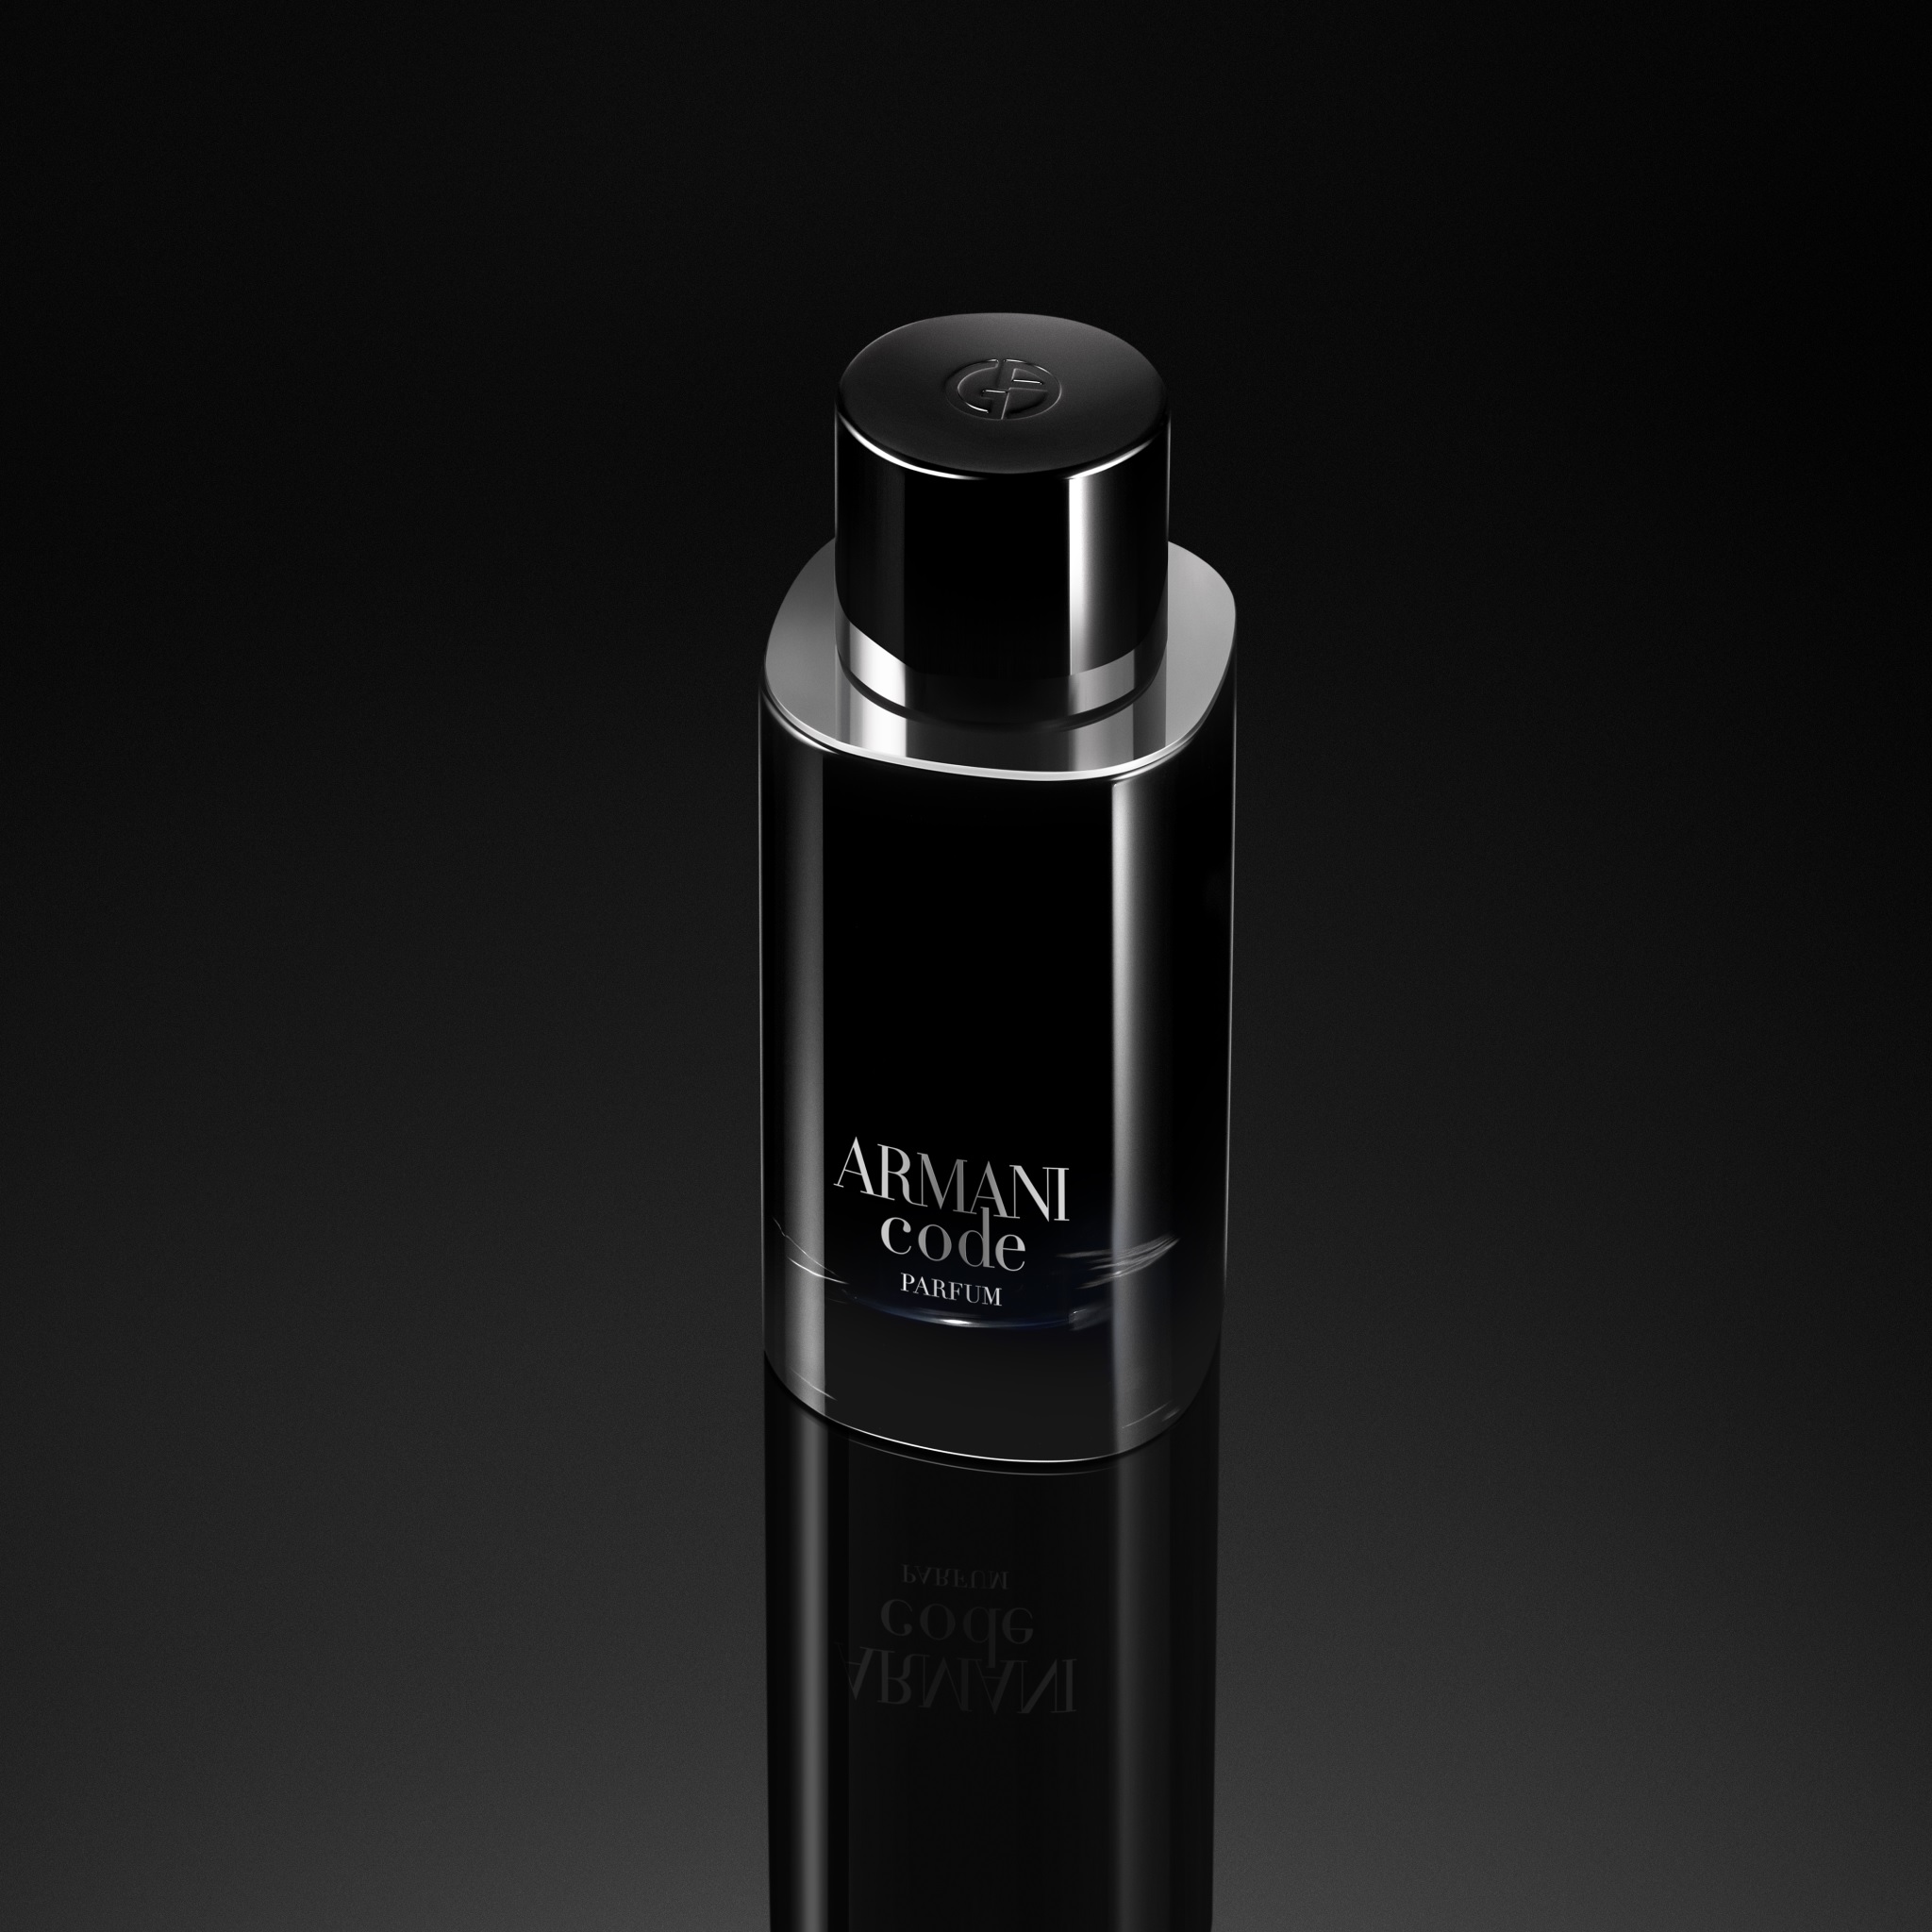 Armani Code Parfum: What's the Point? ~ Fragrance Reviews